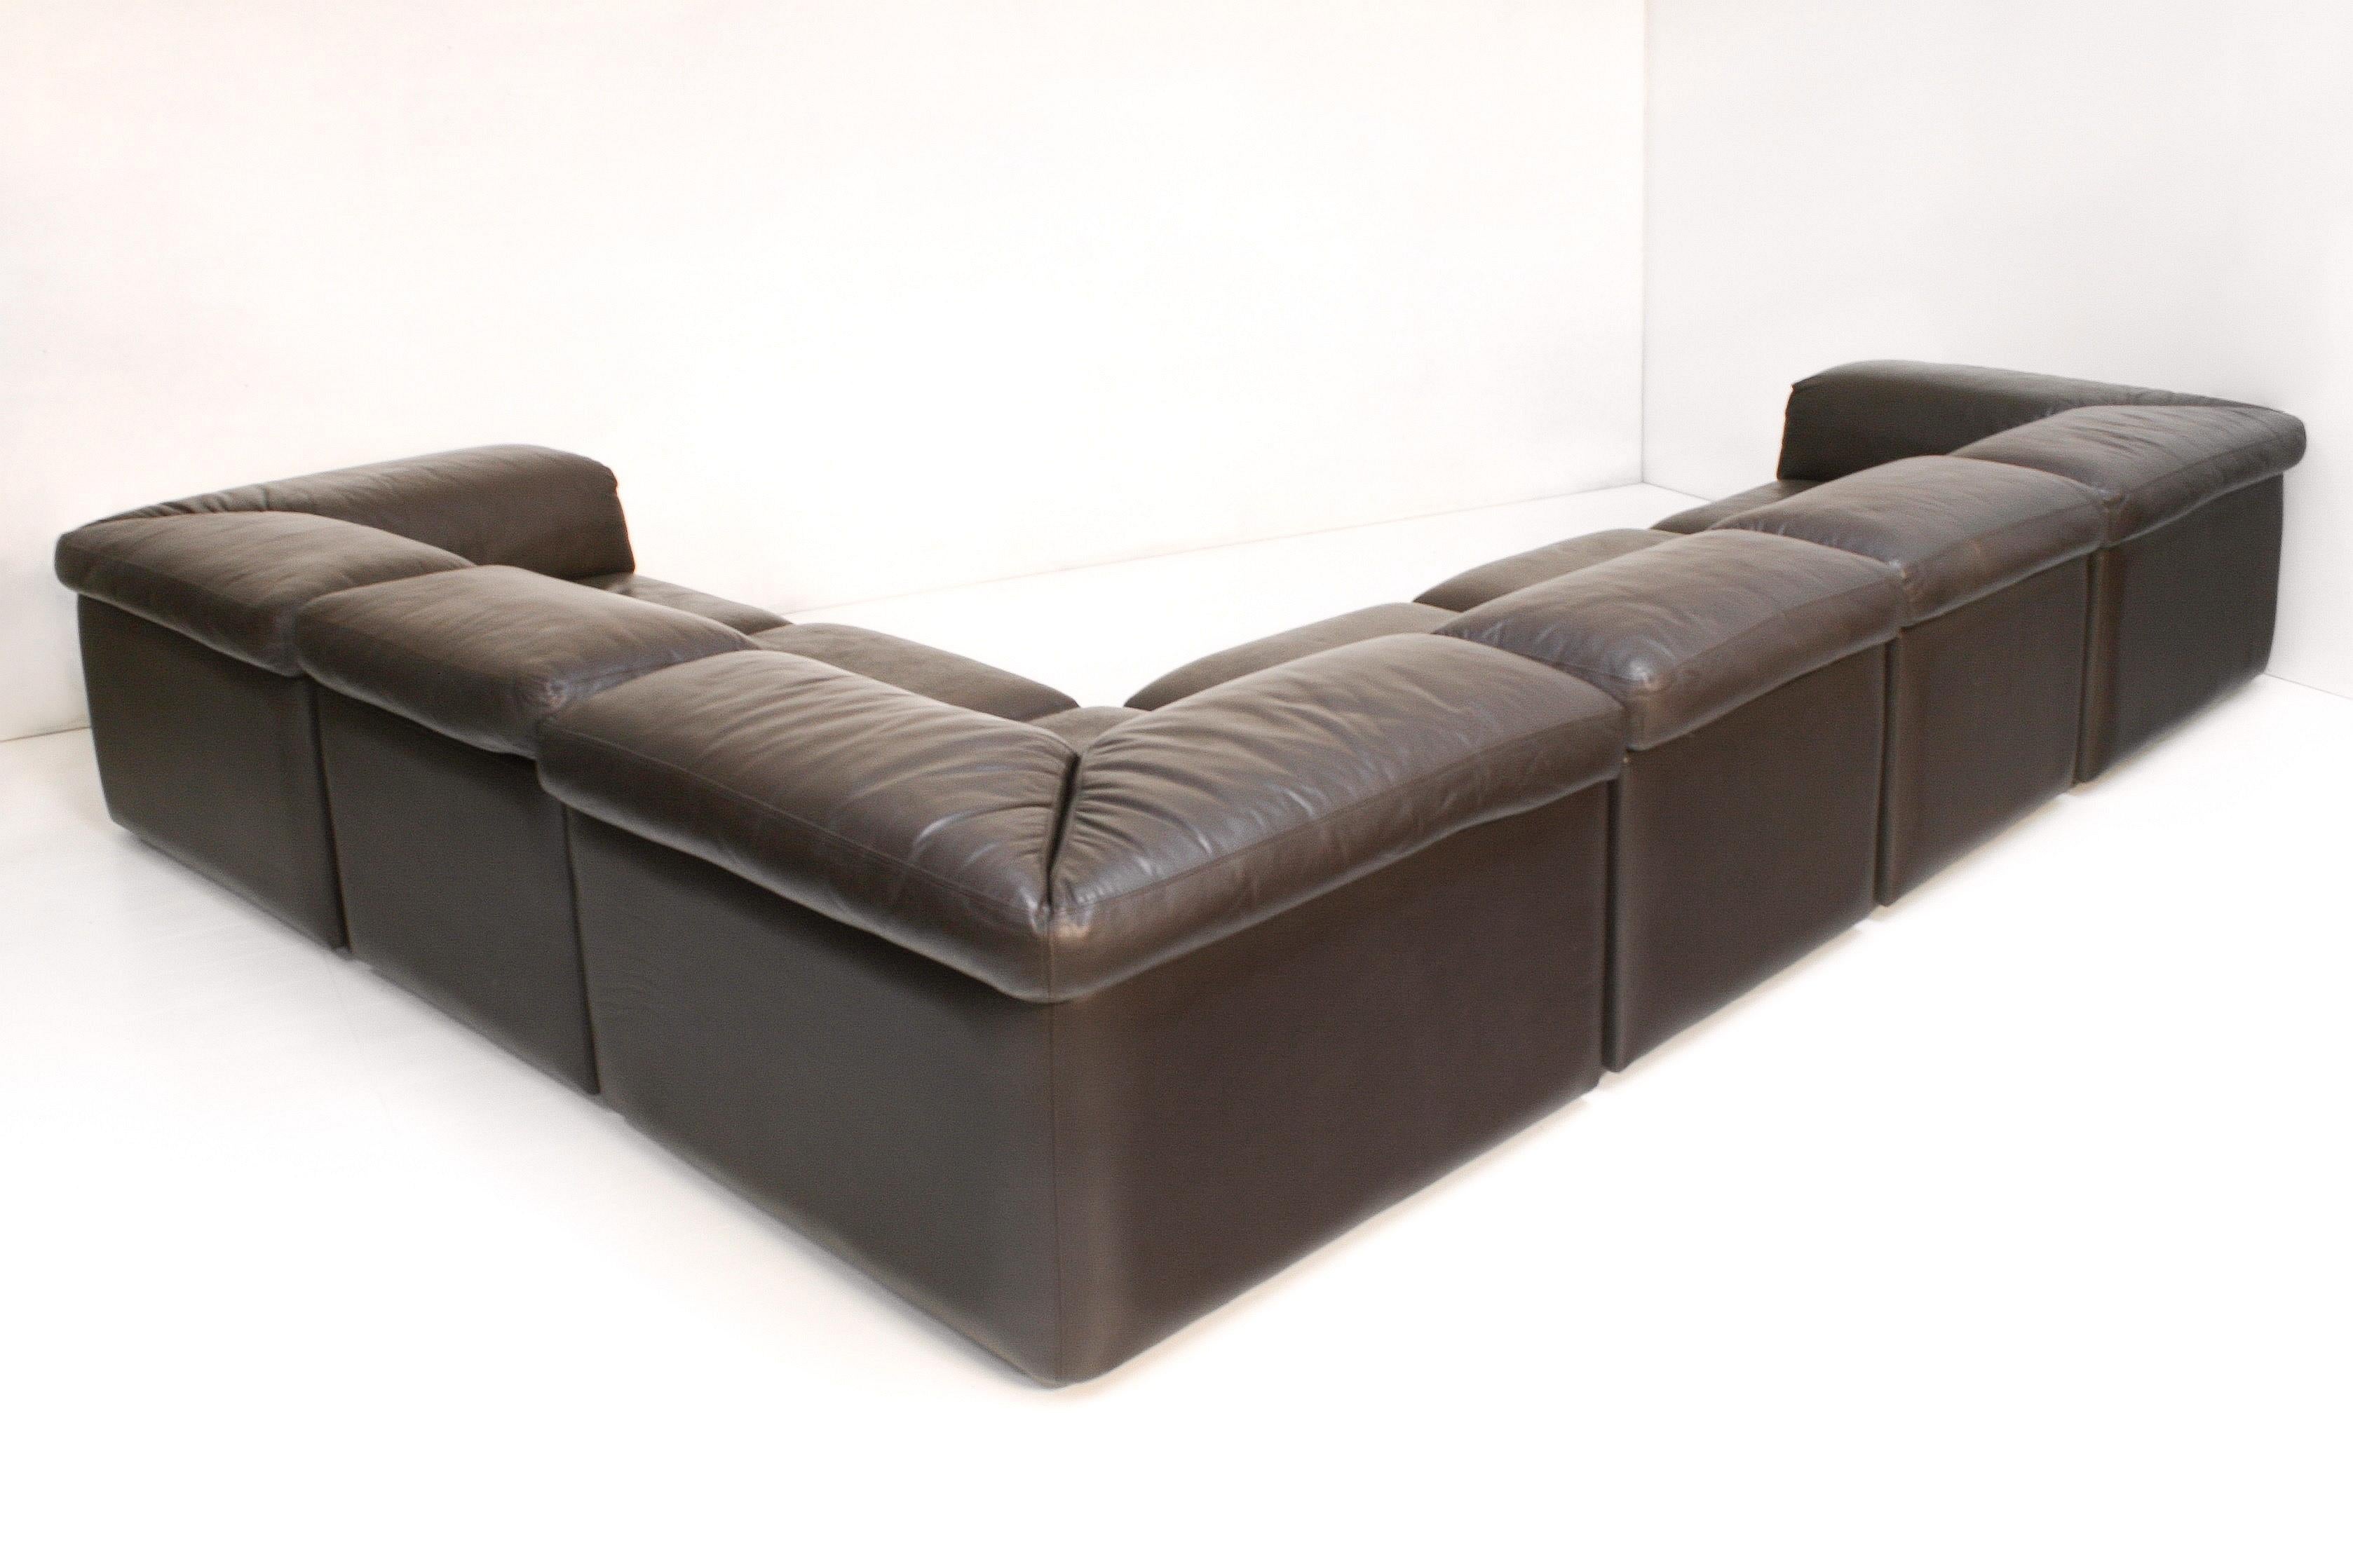 Modular Brown Leather Jeep Sectional Sofa by Anita Schmidt for Durlet, 1970s For Sale 5